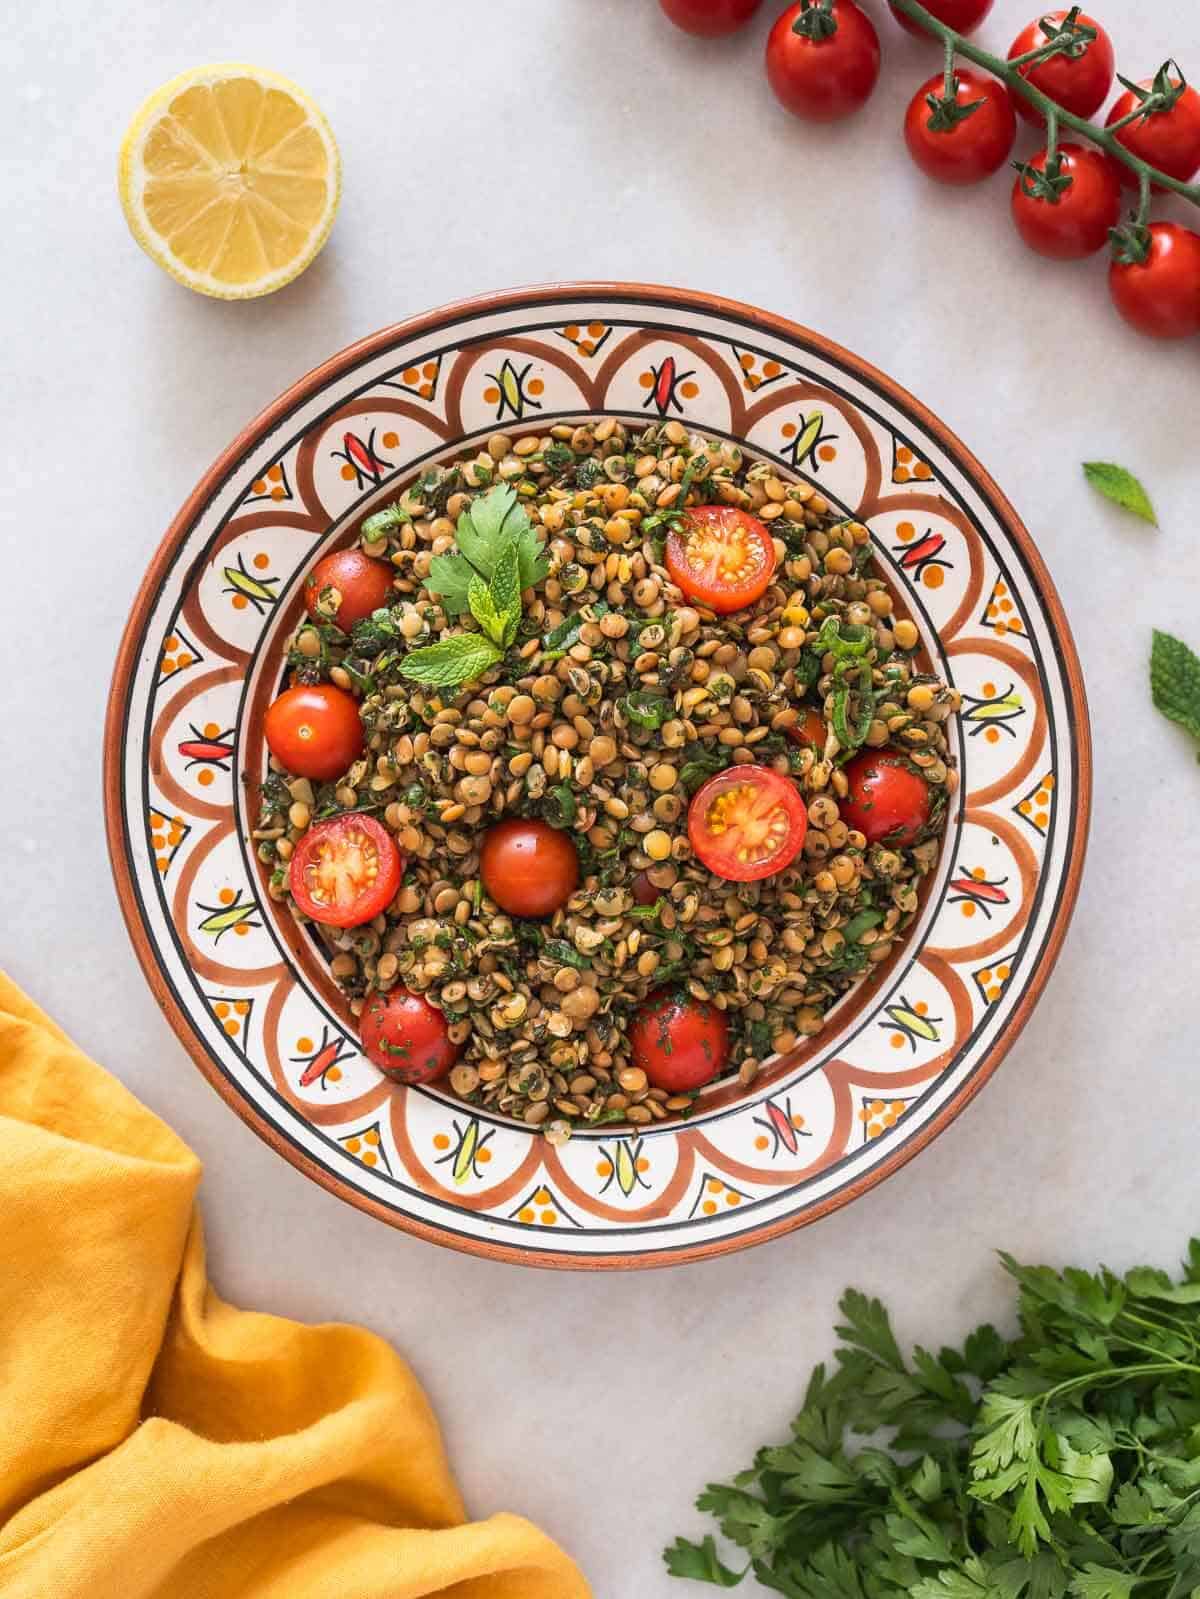 Green Lentil Tabbouleh Salad served in an Arabic-style plate.